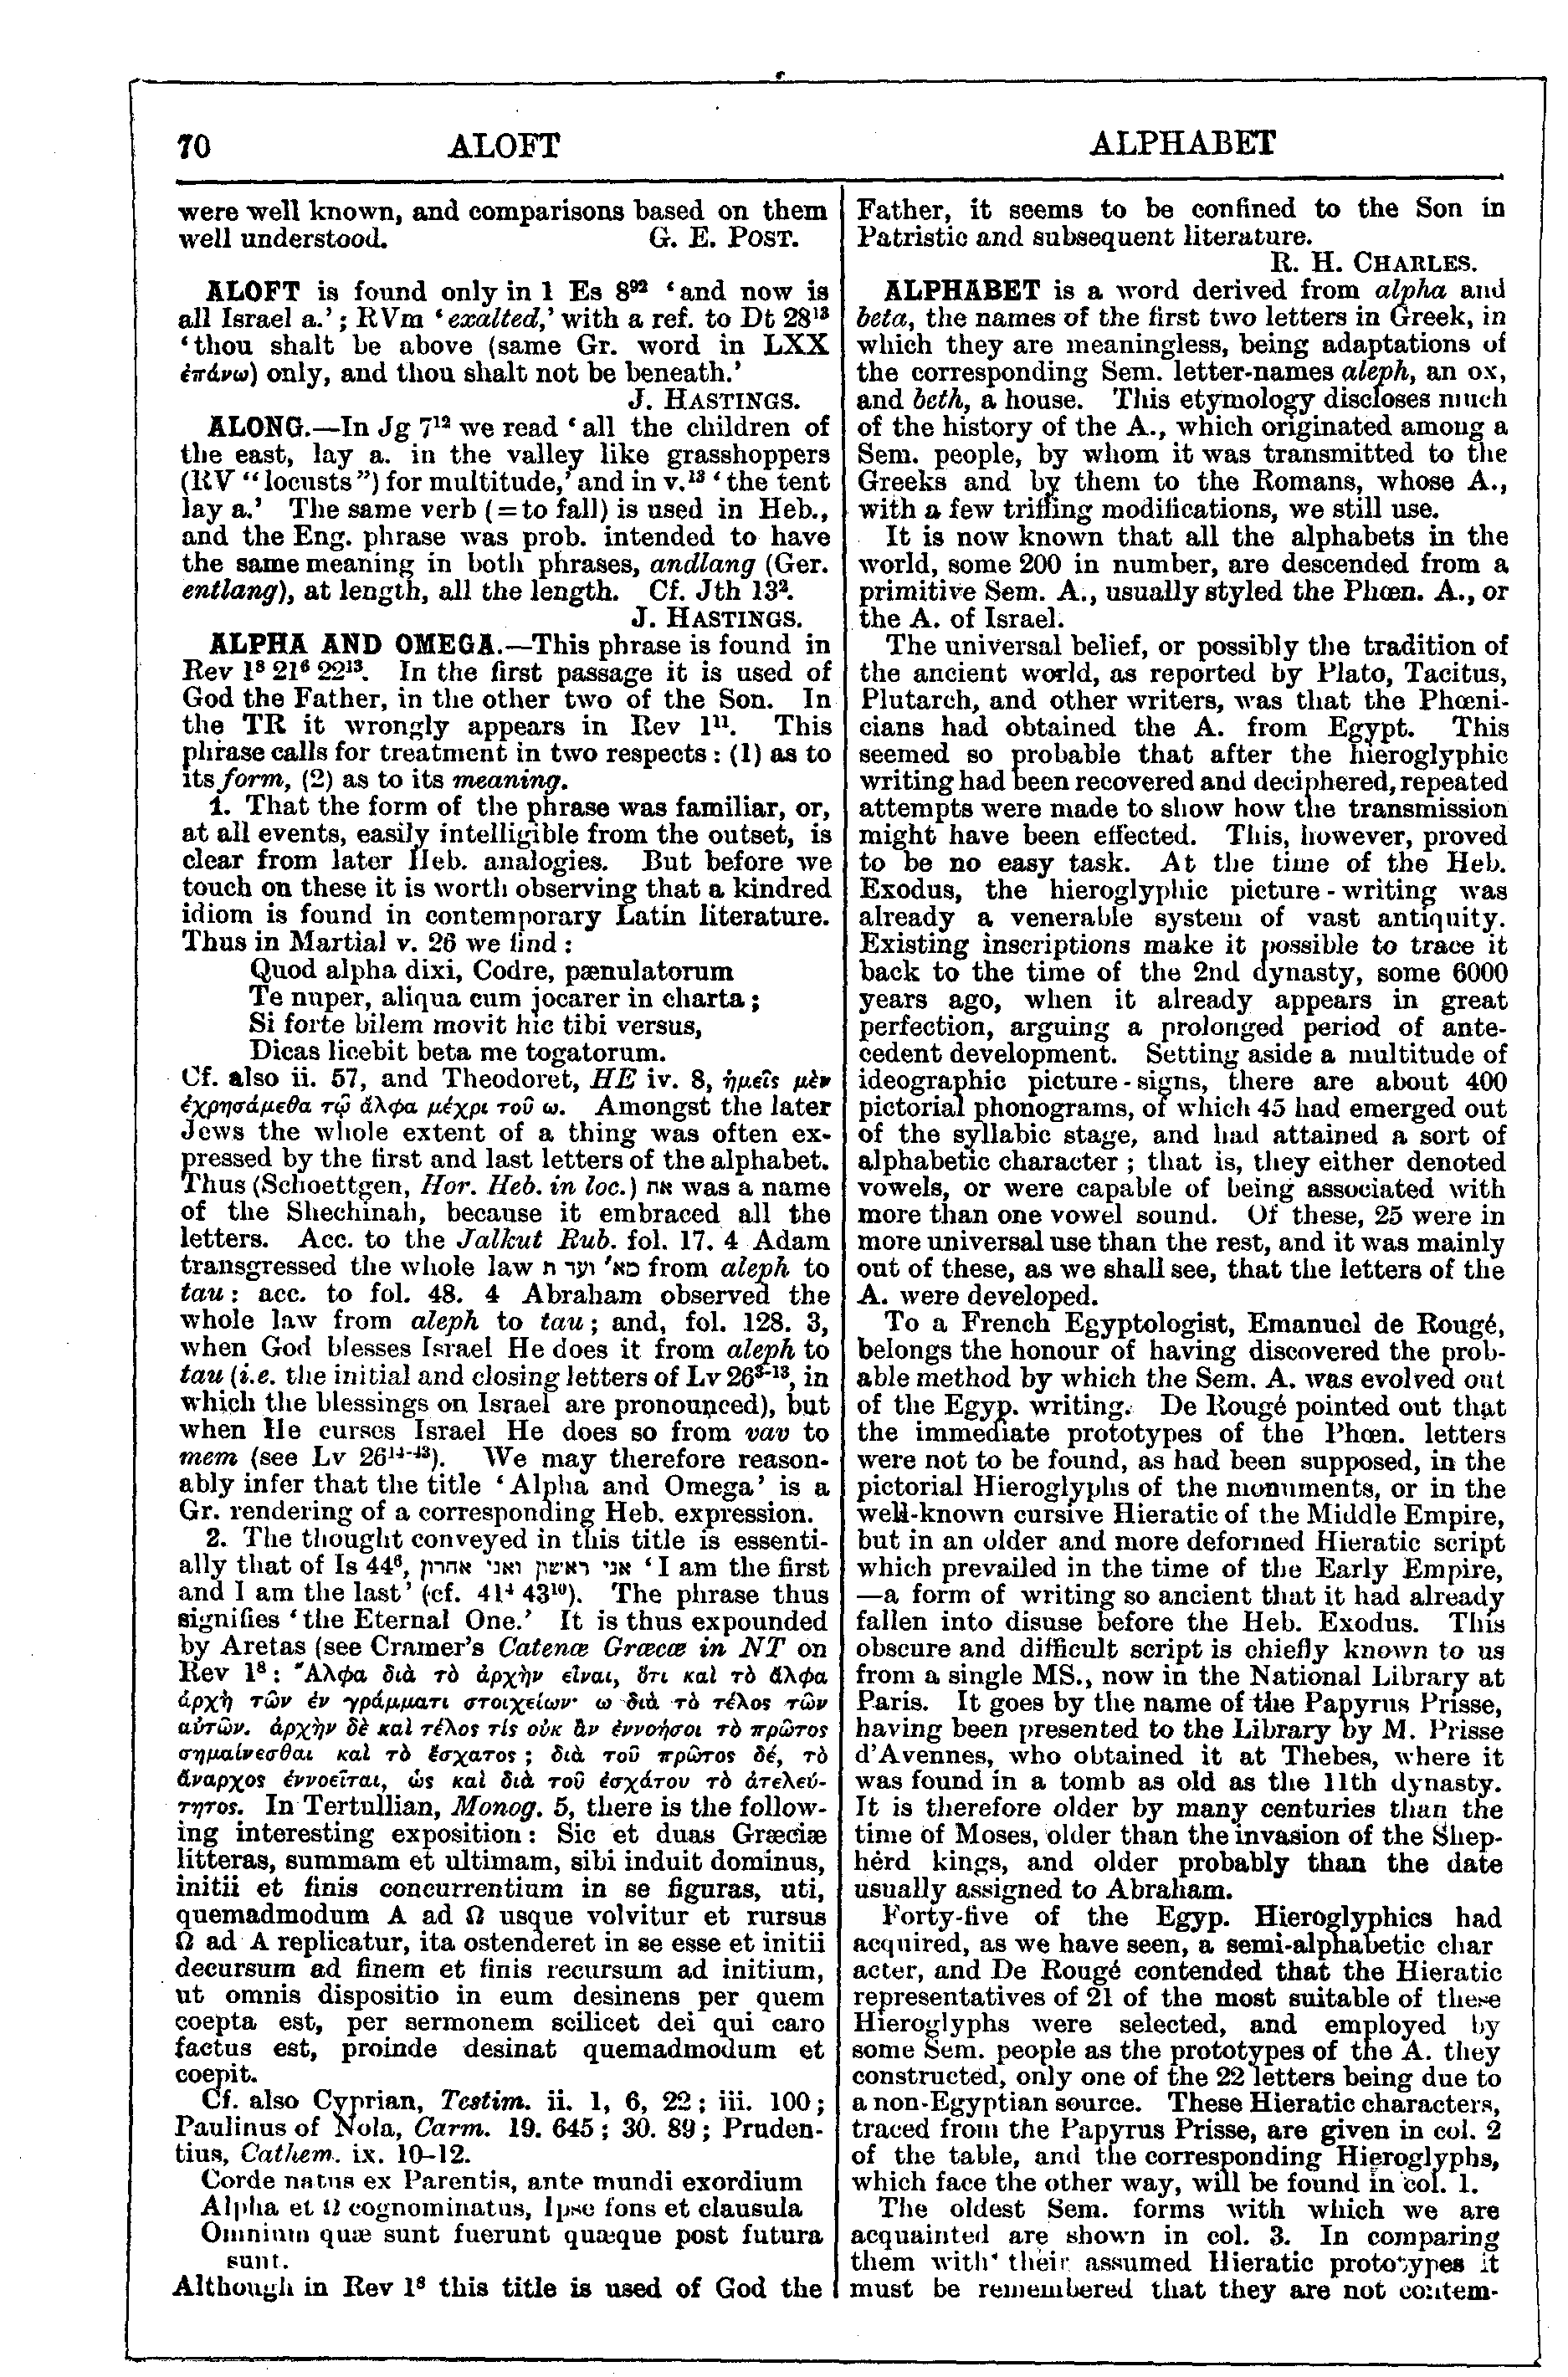 Image of page 70